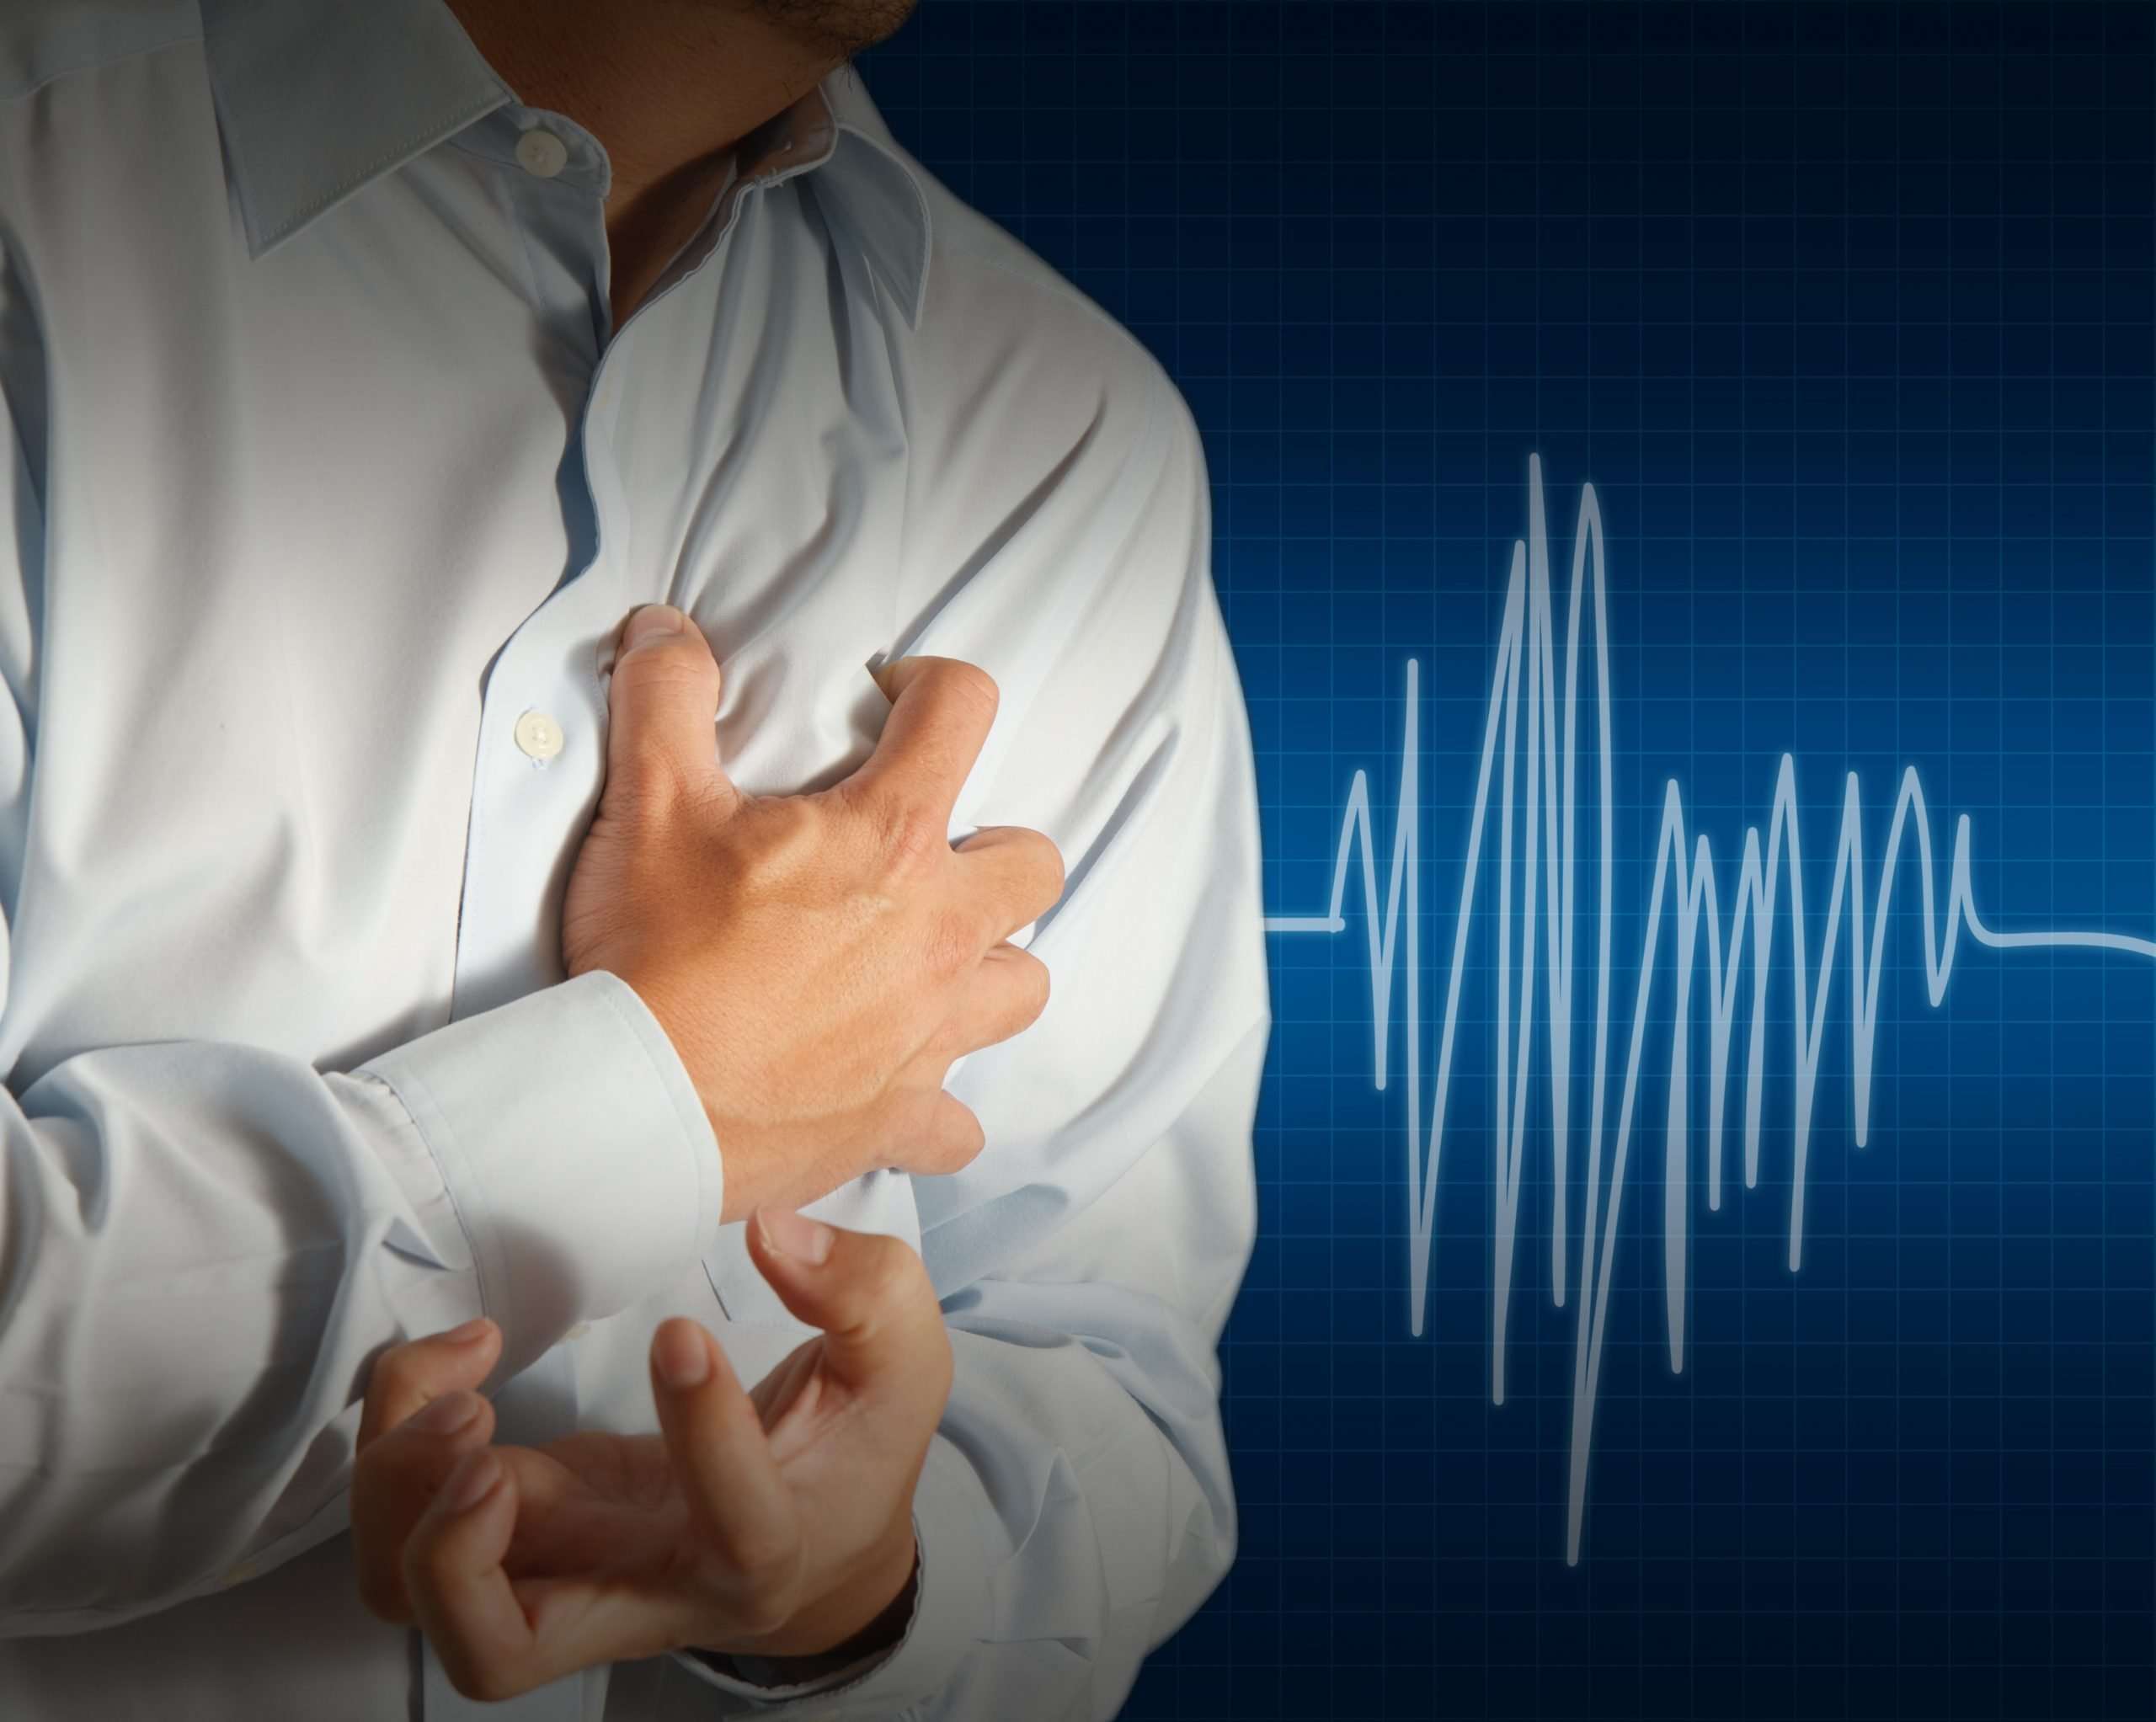 What Are The Warning Signs of a Heart Attack?